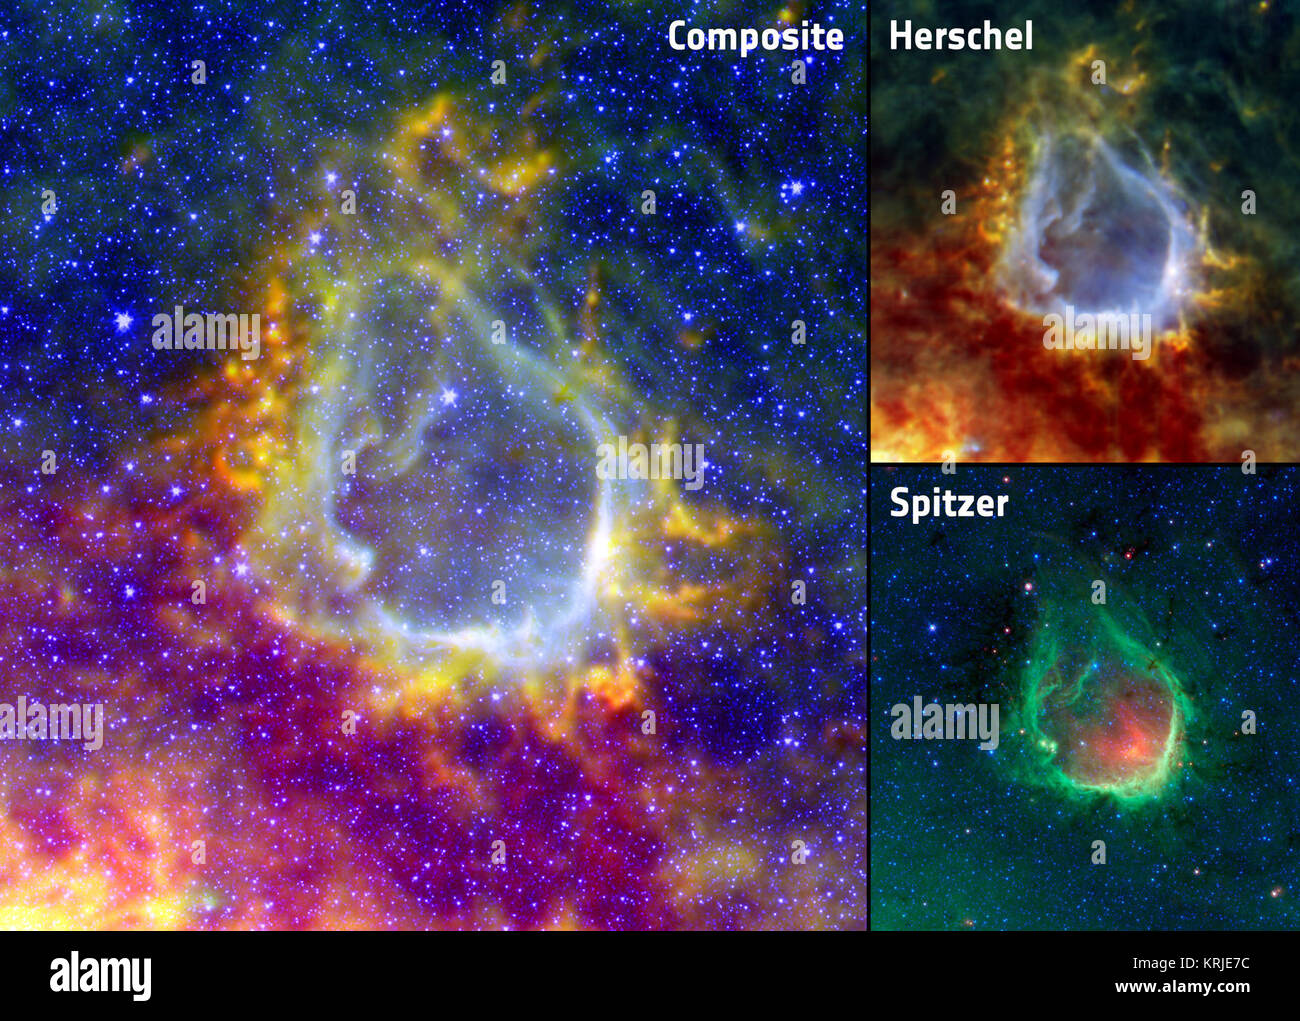 This three panel image shows a composite of RCW 120 with data from Herschel Space Observatory and Spitzer Space Telescope. In the composite image red and yellow show cool dust, seen by Herschel. Bluer colours show warmer dust detected by Spitzer, as well as stars which are either in front of or behind the ring. The insets show the individual images from the two satellites. Rings of Infrared Collage Stock Photo